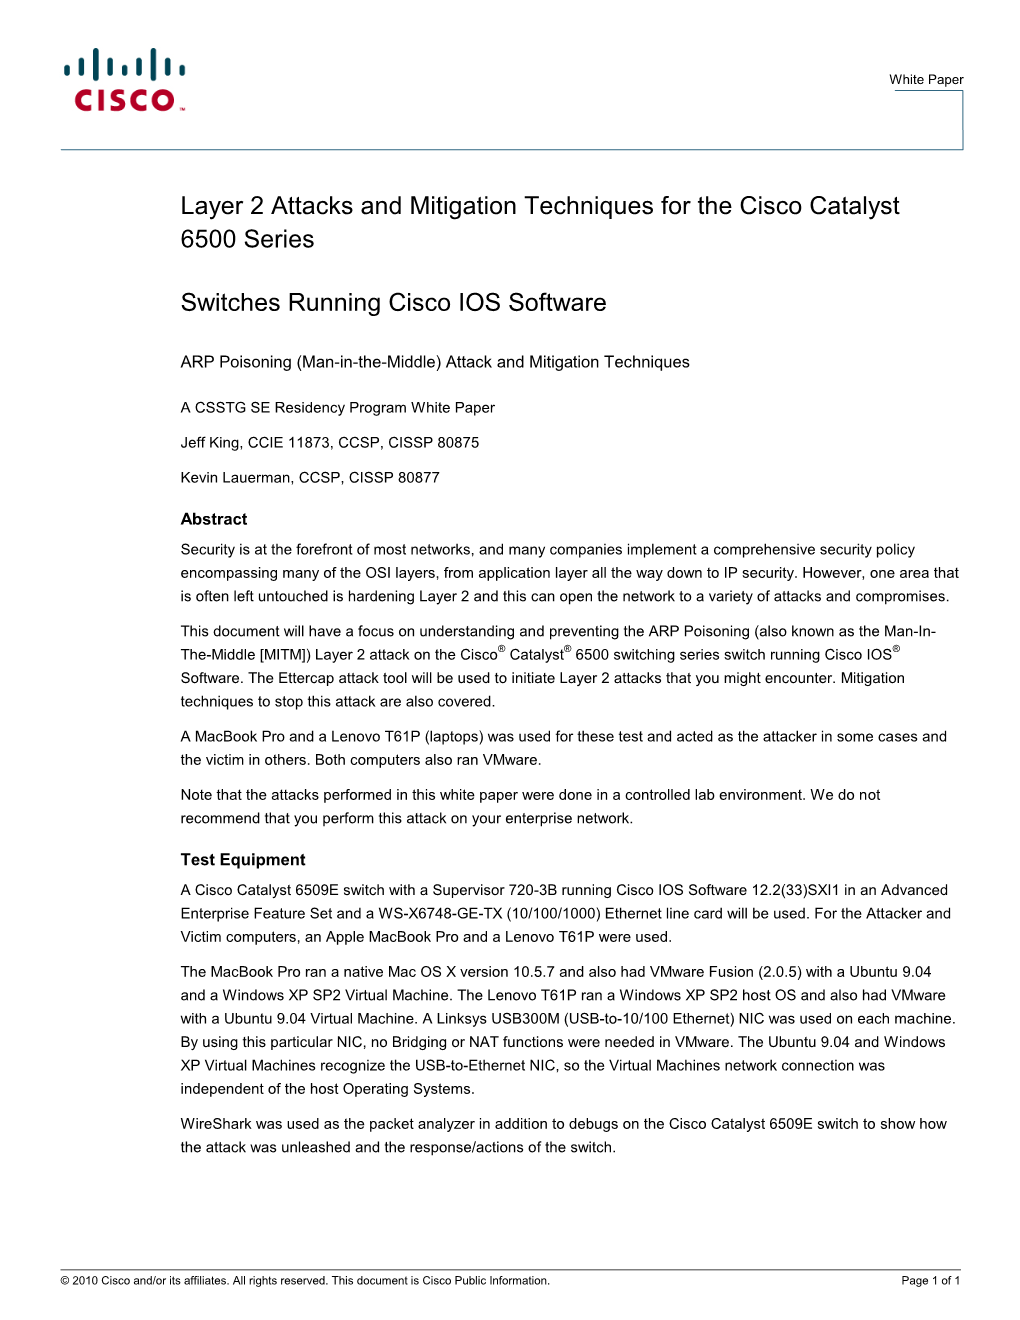 Layer 2 Attacks and Mitigation Techniques for the Cisco Catalyst 6500 Series Switches Running Cisco IOS Software